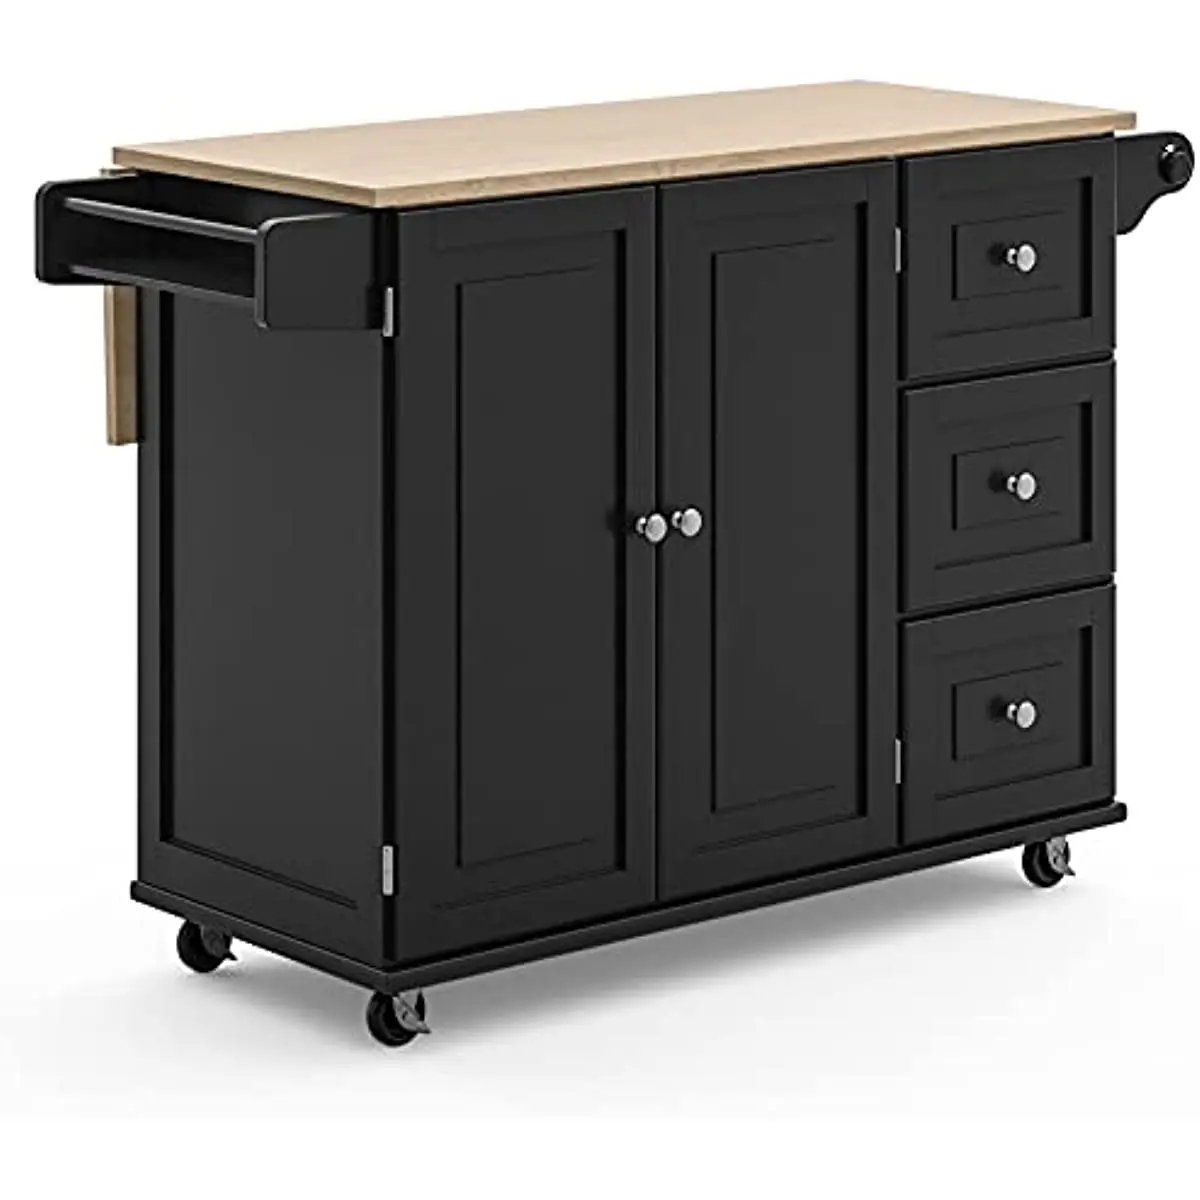 

Homestyles Dolly Madison Kitchen Cart Wood Top Drop Leaf Breakfast Bar Rolling Mobile Kitchen Island with Storage Towel